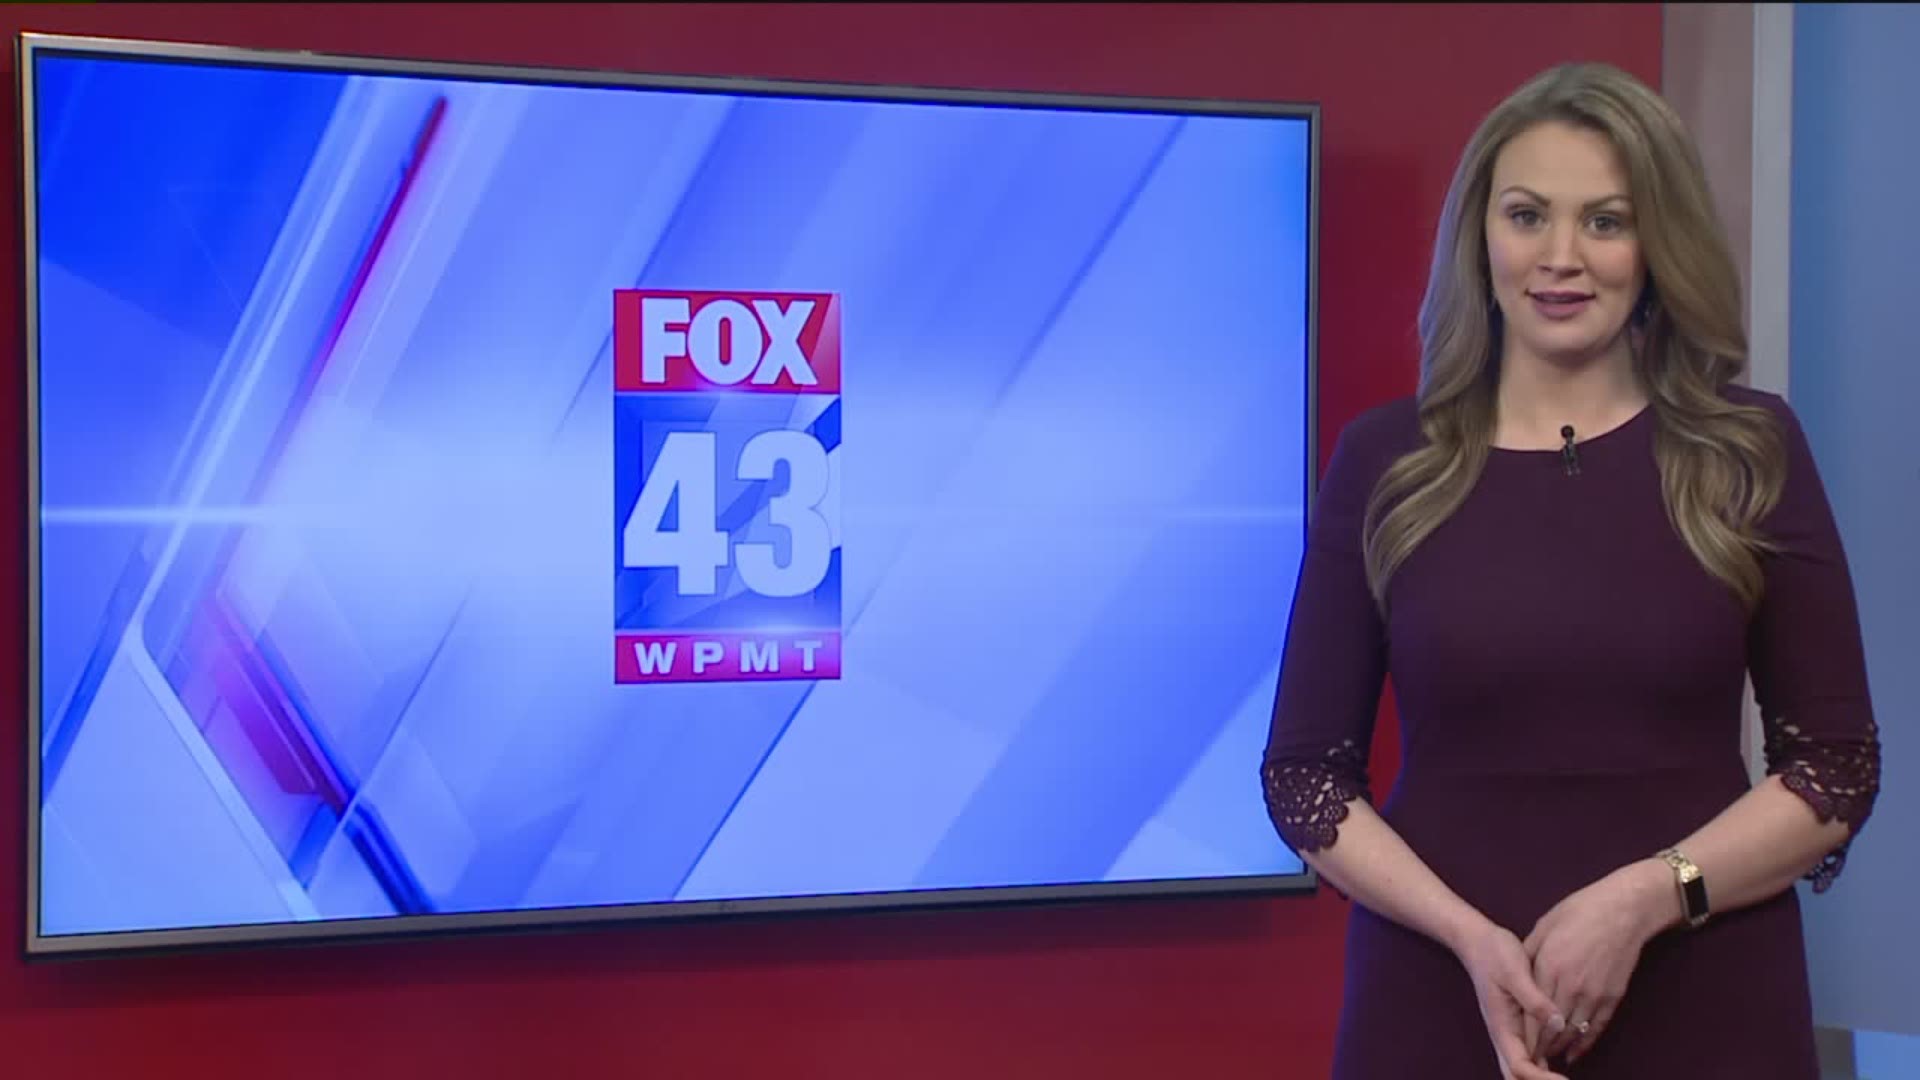 FOX43's Jackie De Tore shows us how Planet Fitness is offering free daily workouts on its Facebook page to get people moving during the COVID-19 pandemic.